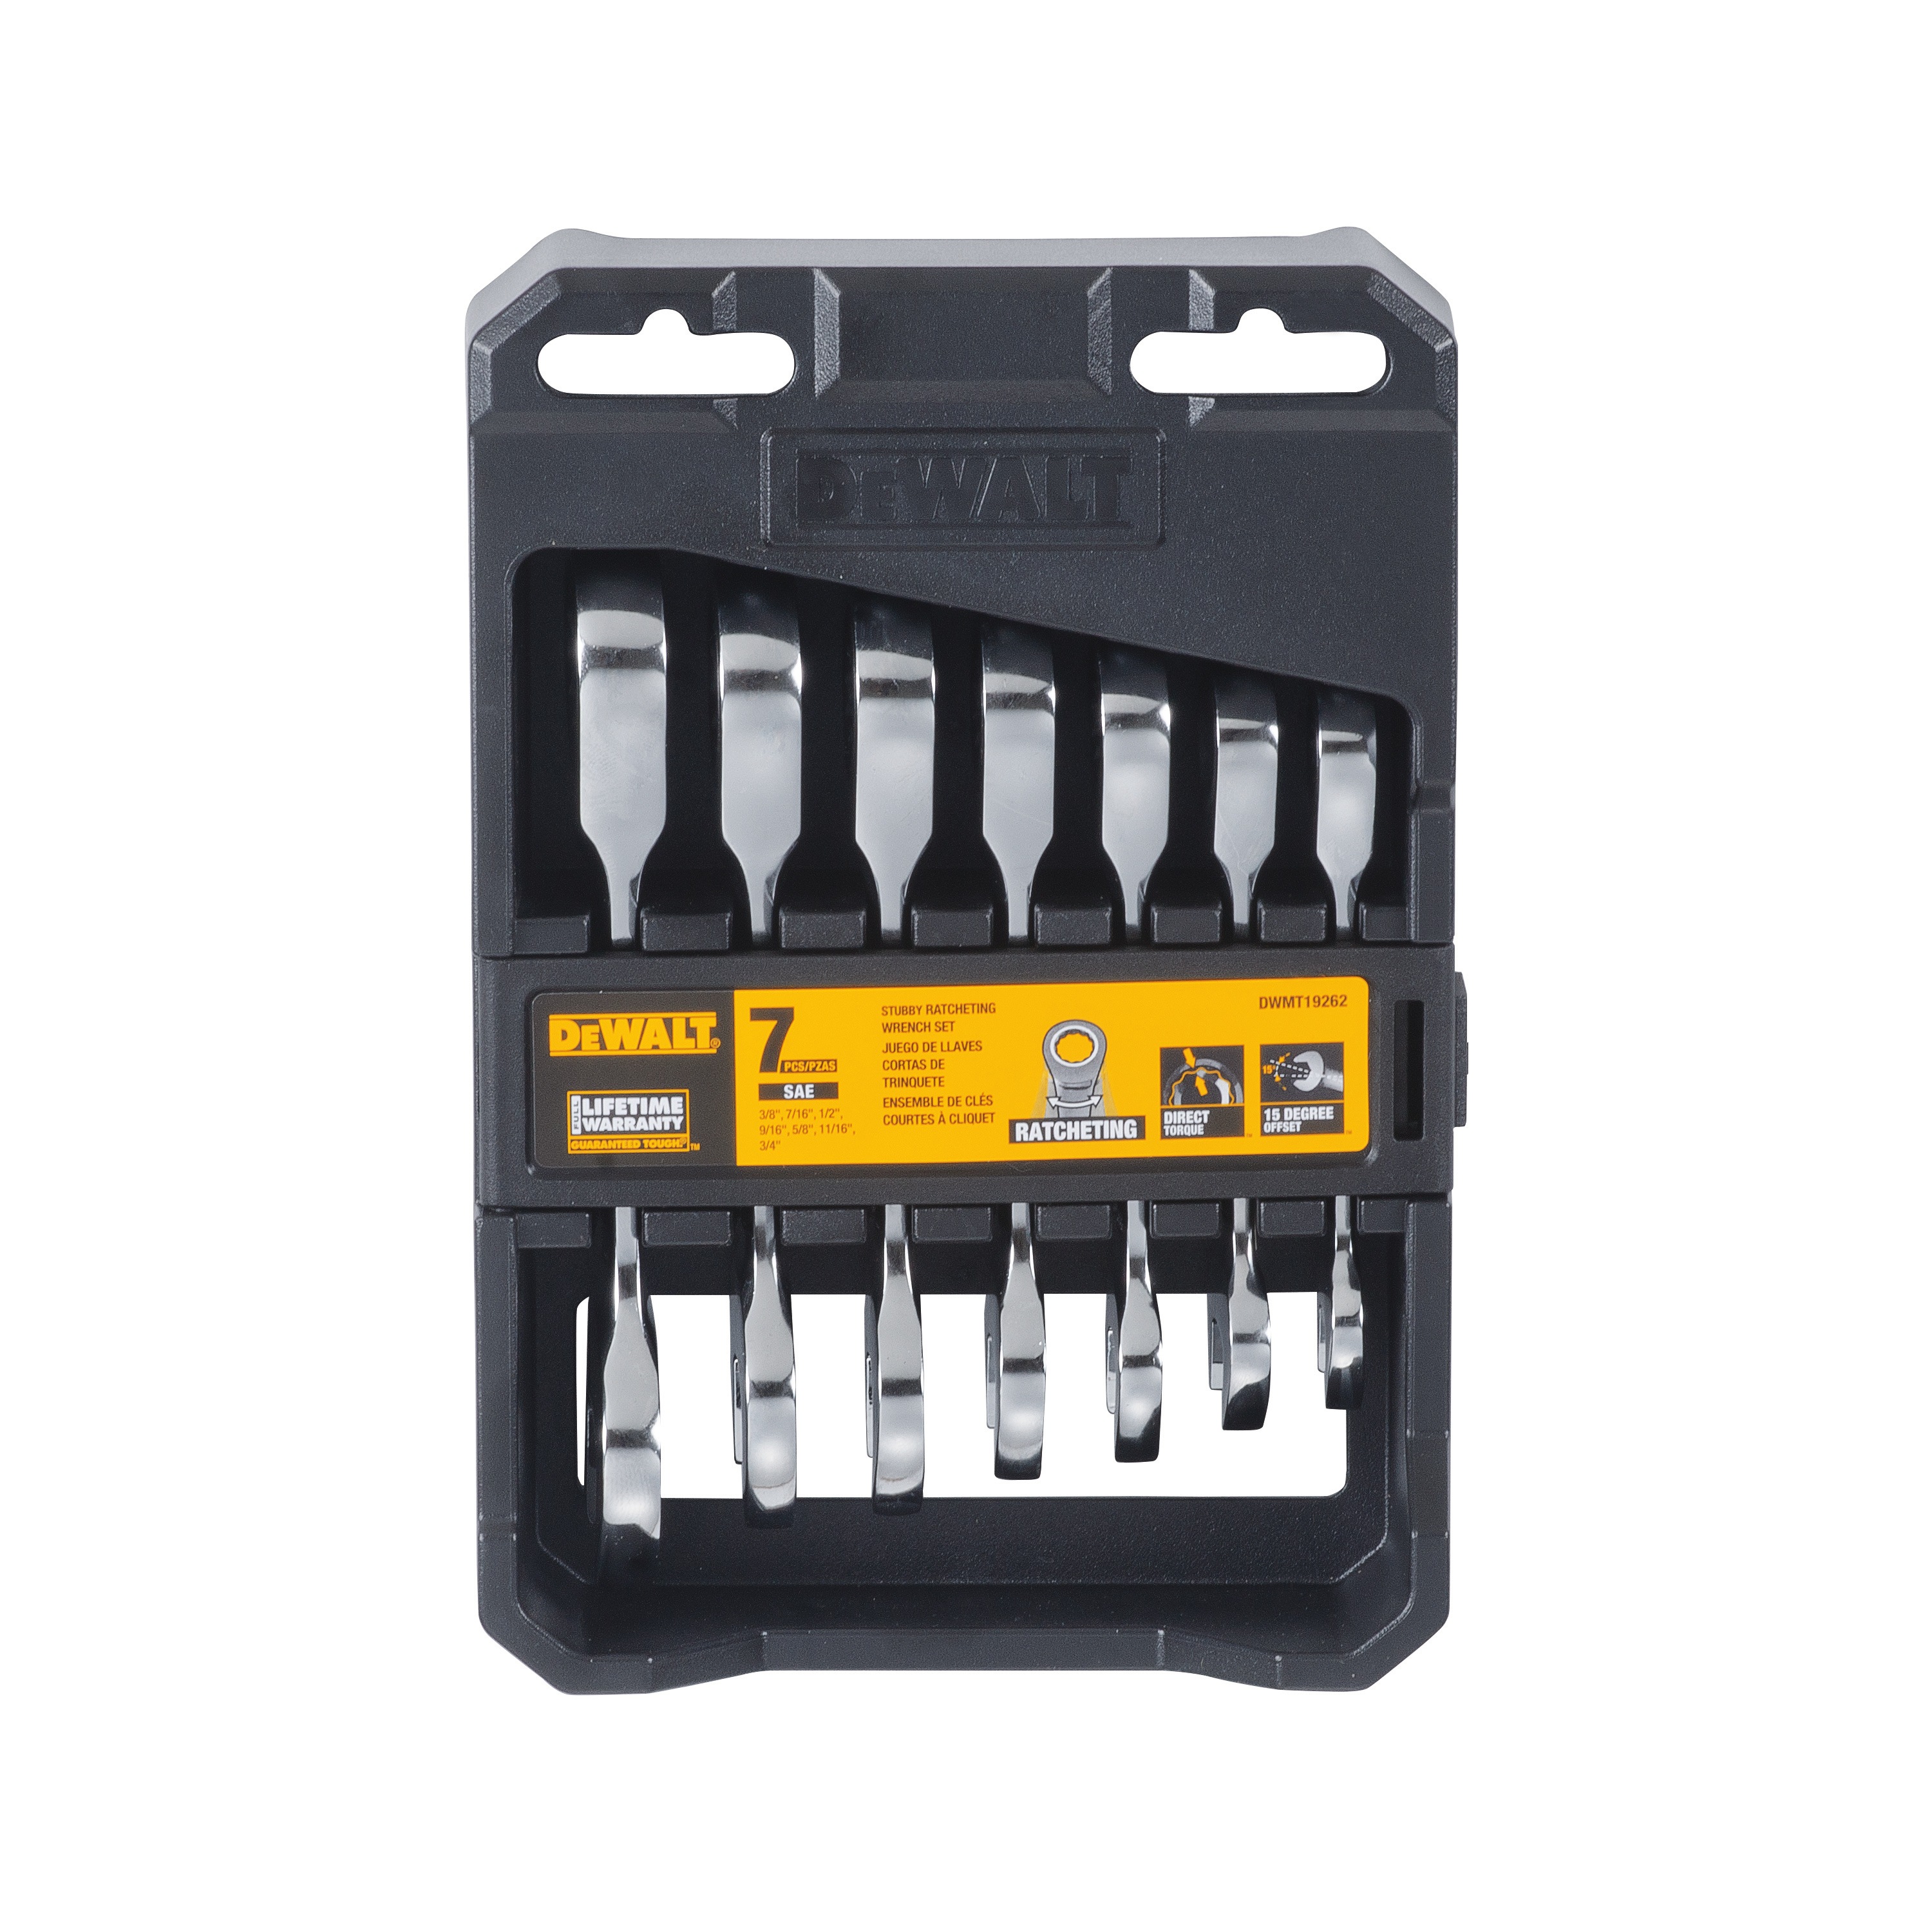 DEWALT 7 piece stubby ratcheting wrench set packed in its case.